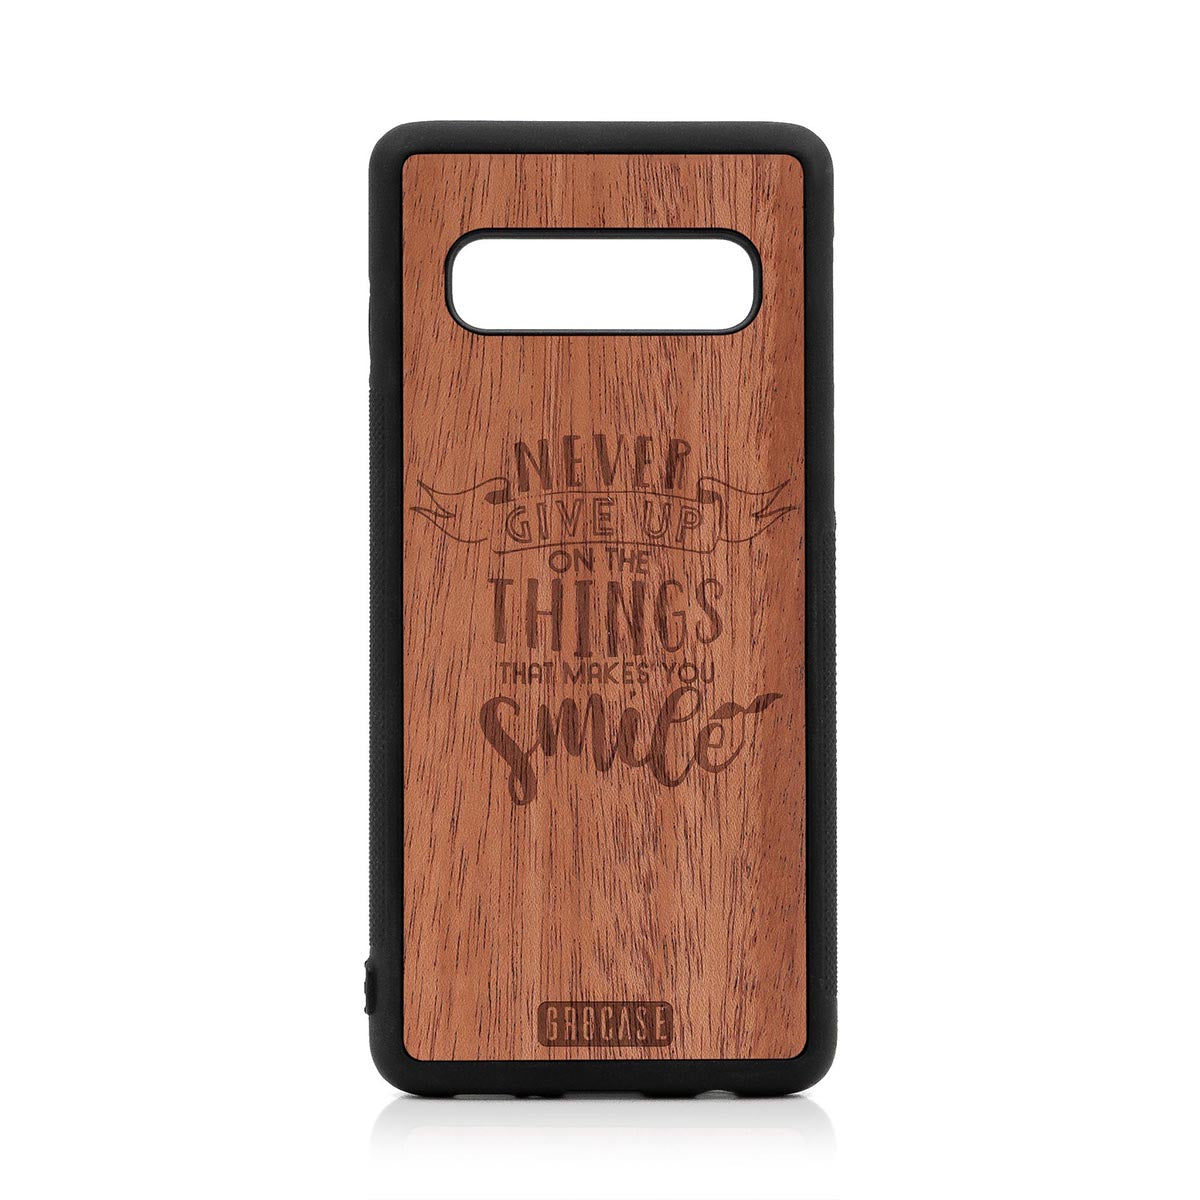 Never Give Up On The Things That Makes You Smile Design Wood Case For Samsung Galaxy S10 by GR8CASE